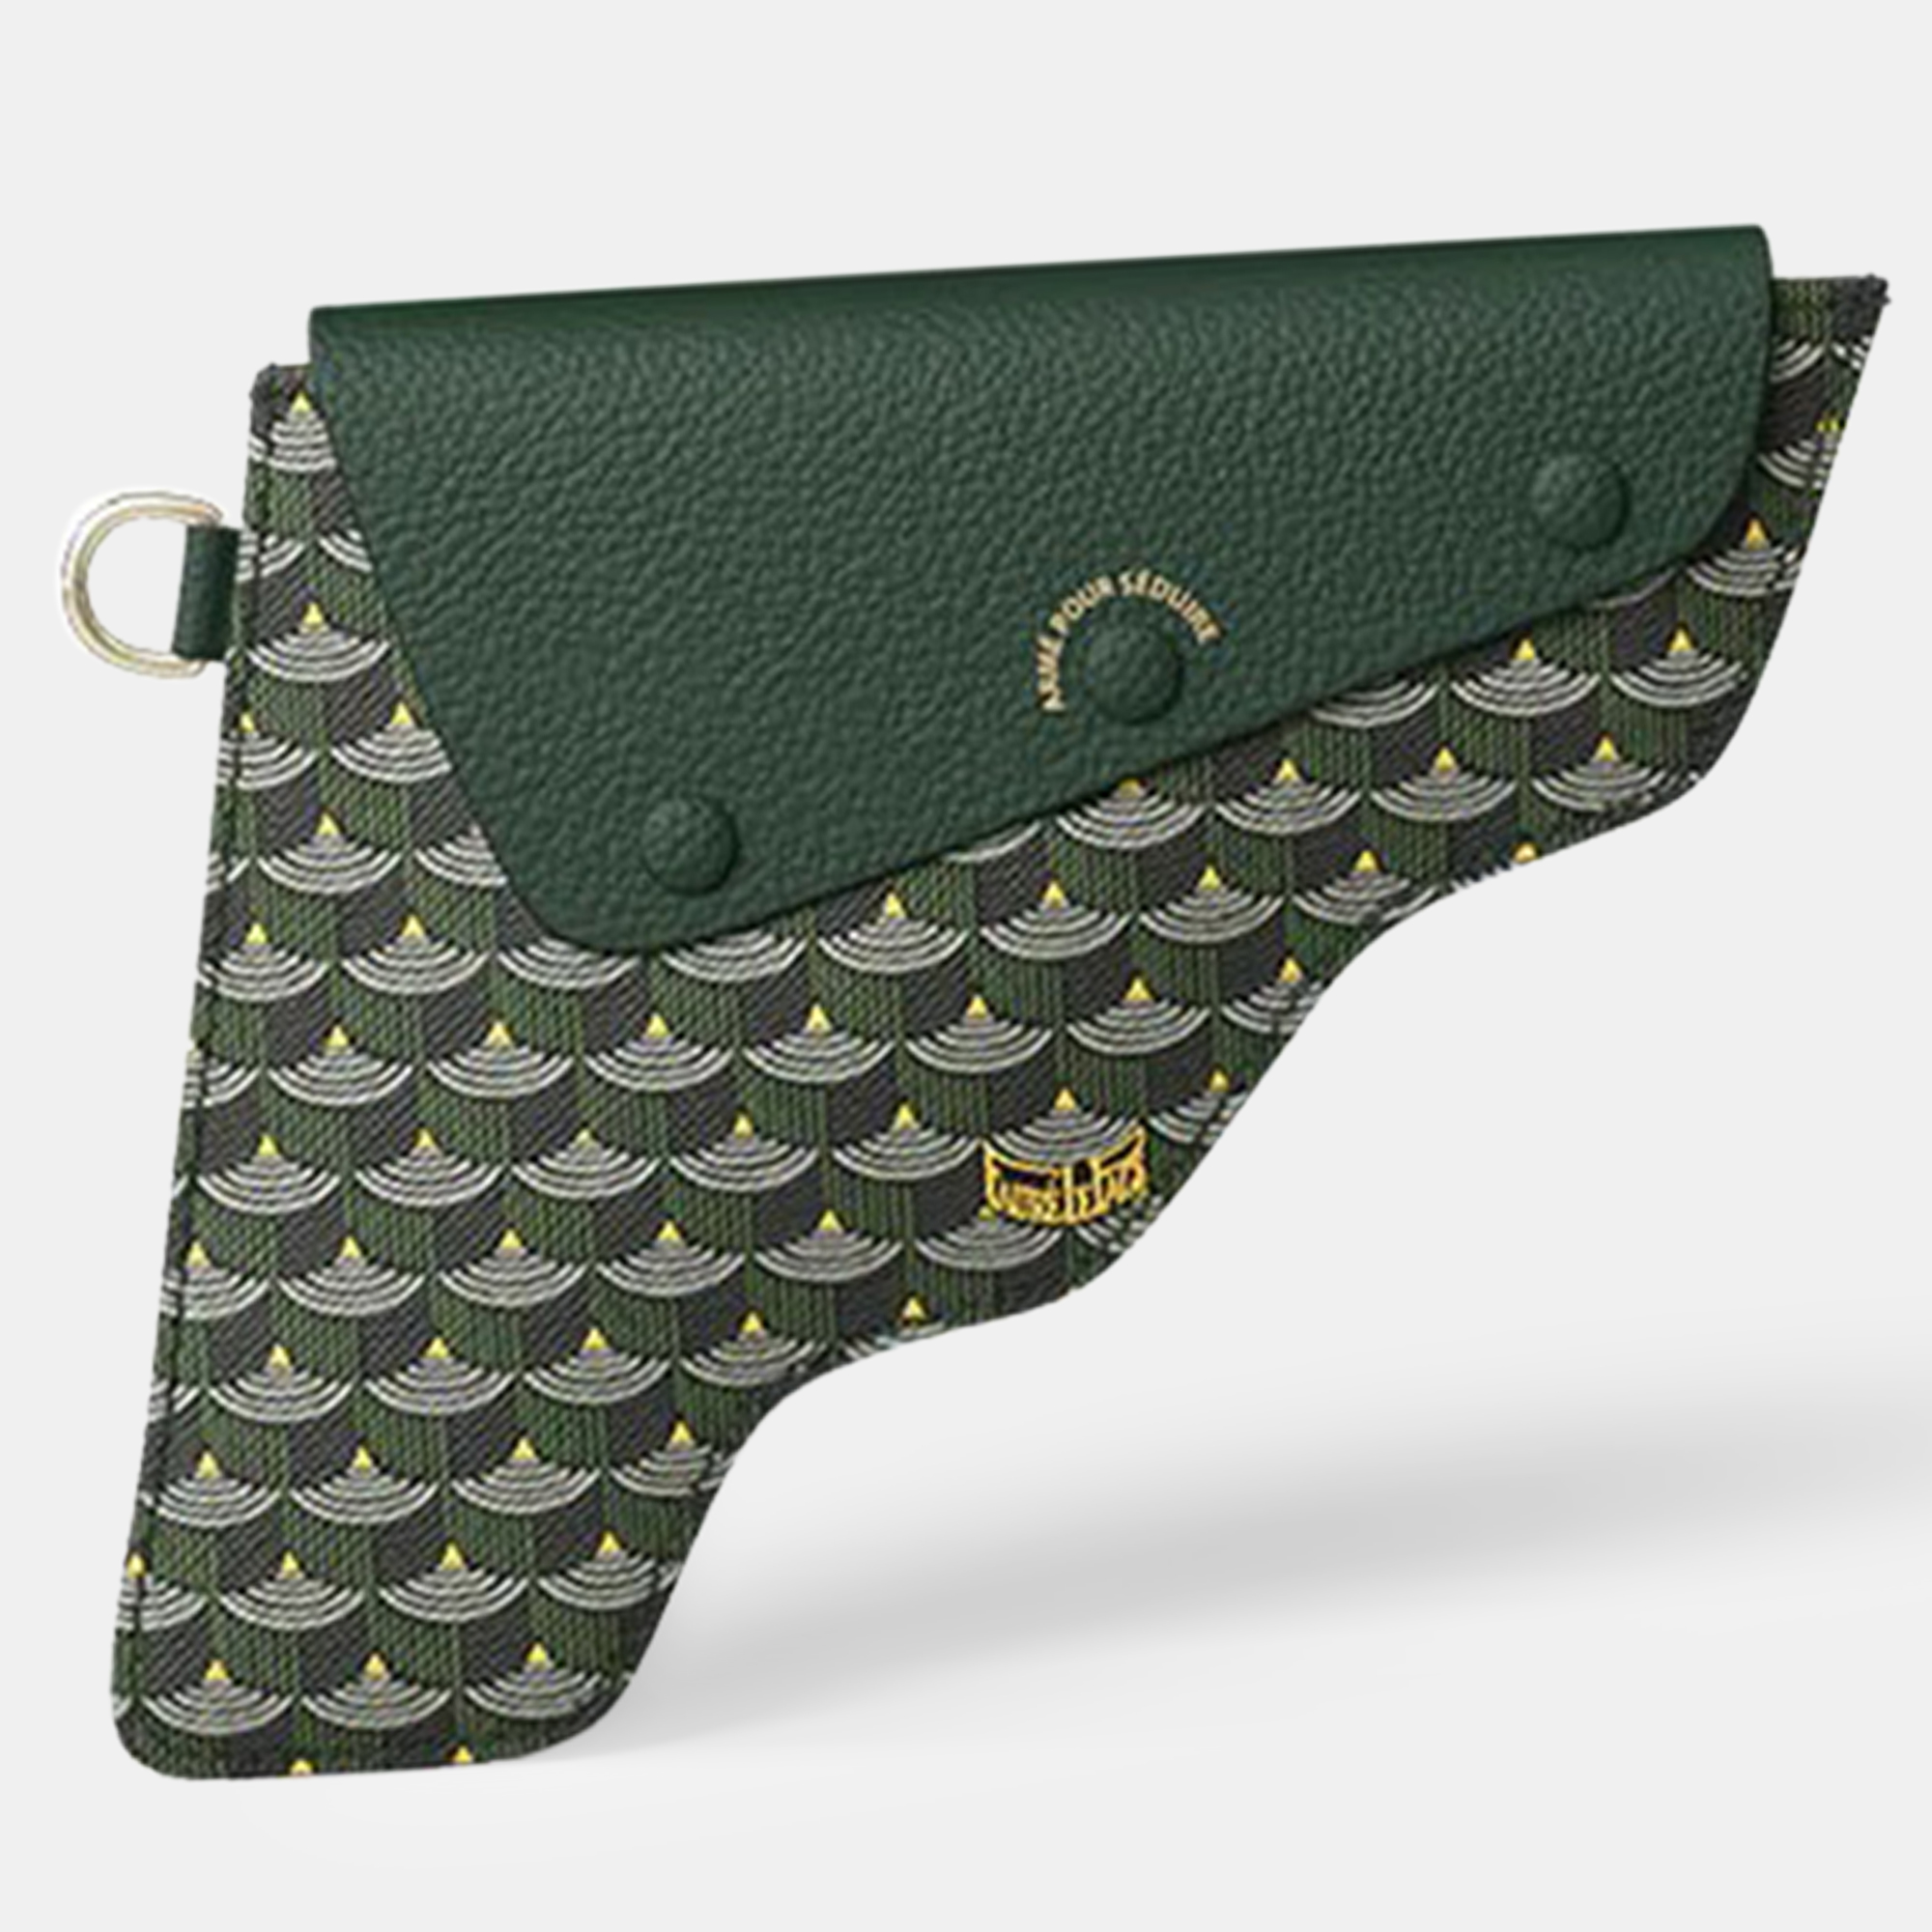 Faure Le Page Green Leather Pochete